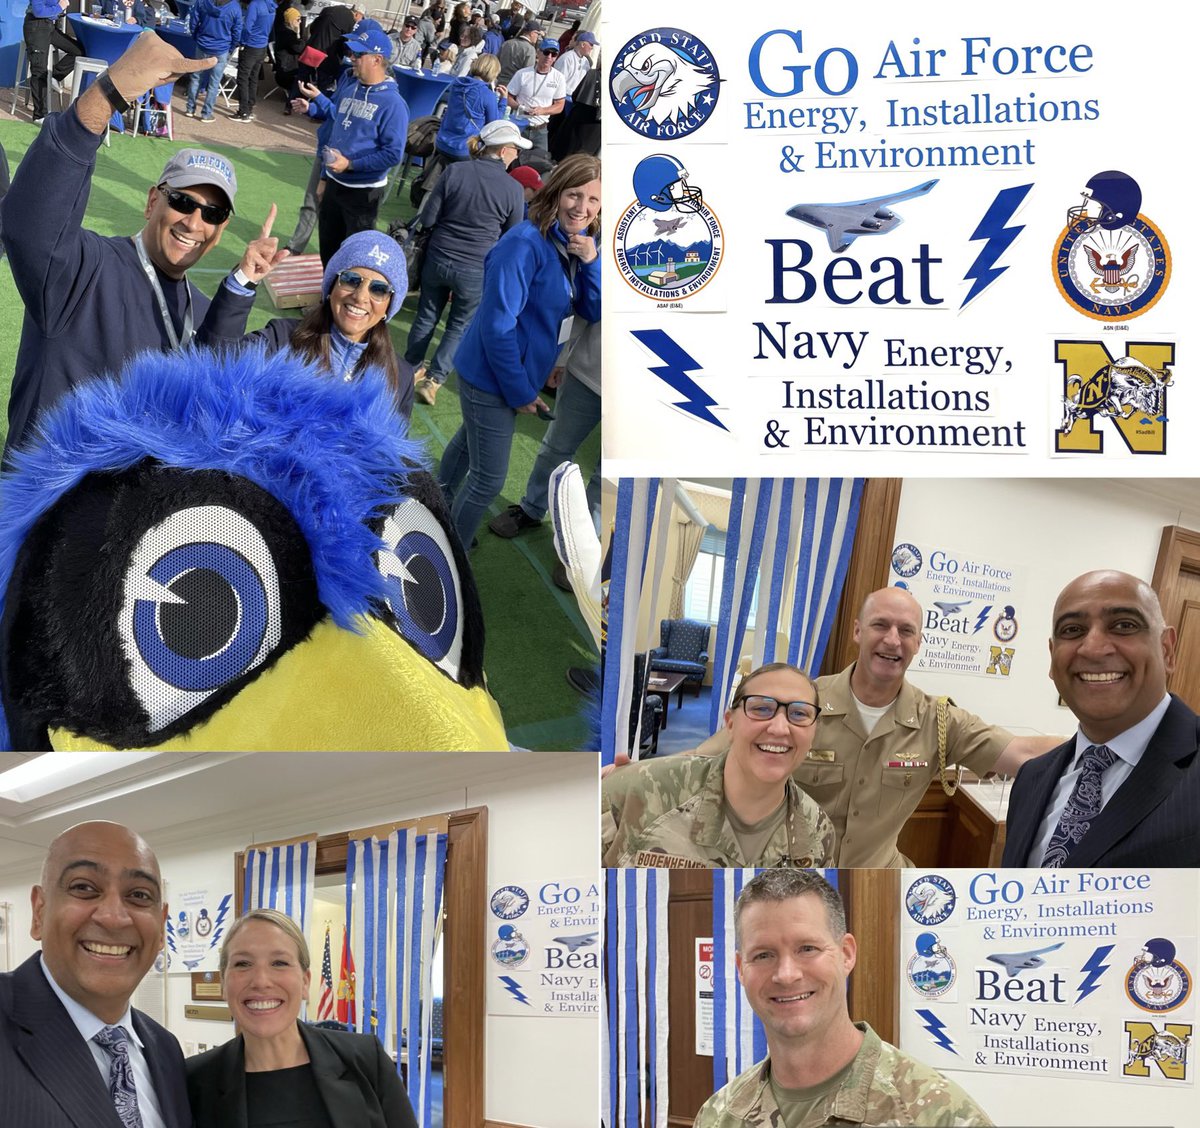 Assistant Secretary of the AF, Ravi Chaudhary surprised Assistant Secretary of the Navy Meredith Berger with an early morning spirit mission at the Pentagon. Our @ASNEIE brothers and sisters loved it, laughed, and were good sports! One team, One fight! #GoAirForce #BeatNavy